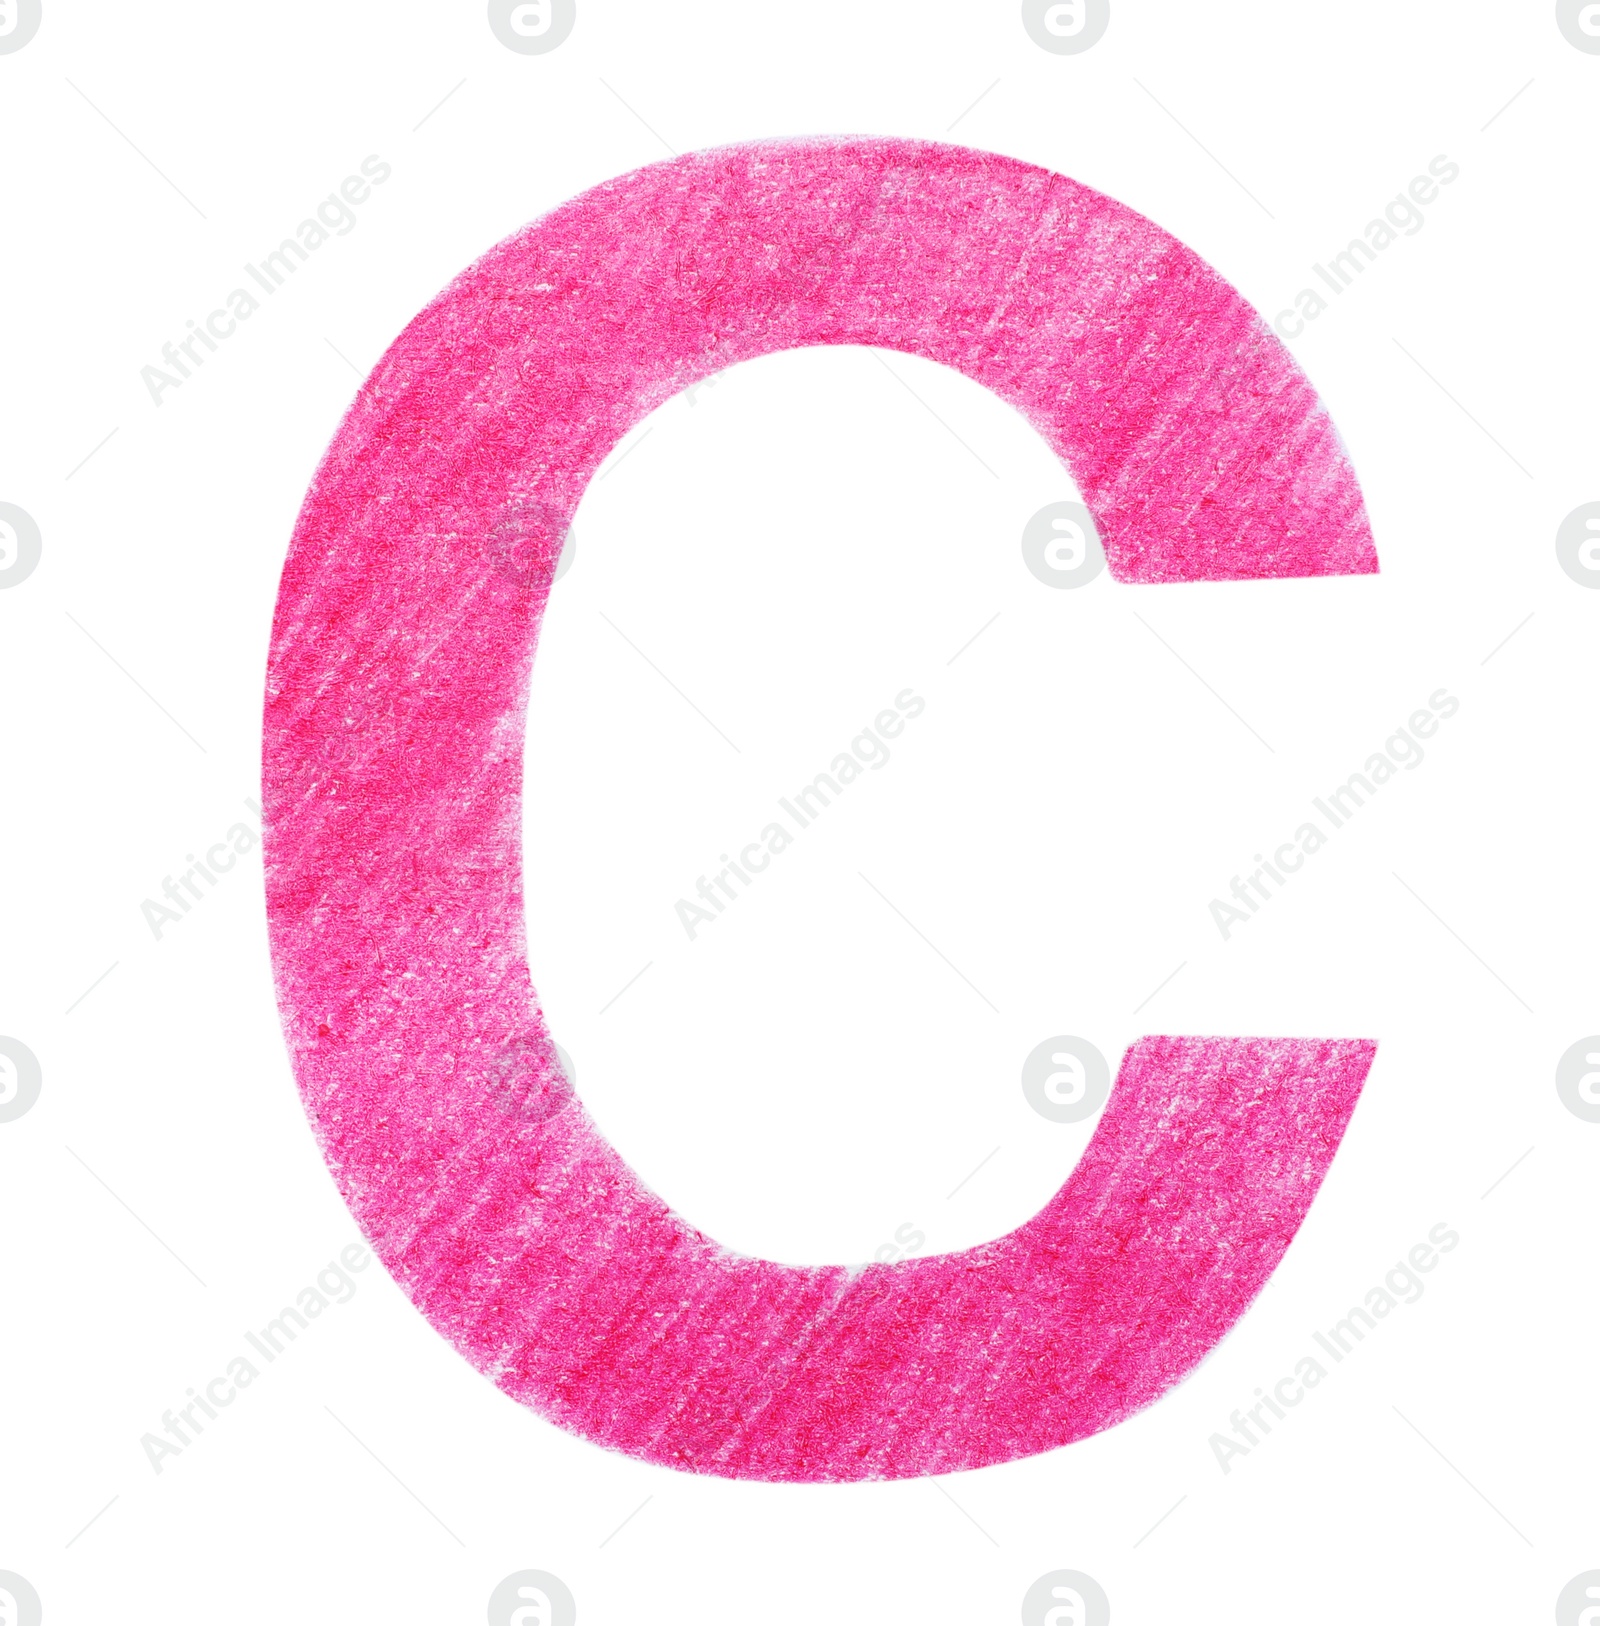 Photo of Letter C written with pink pencil on white background, top view